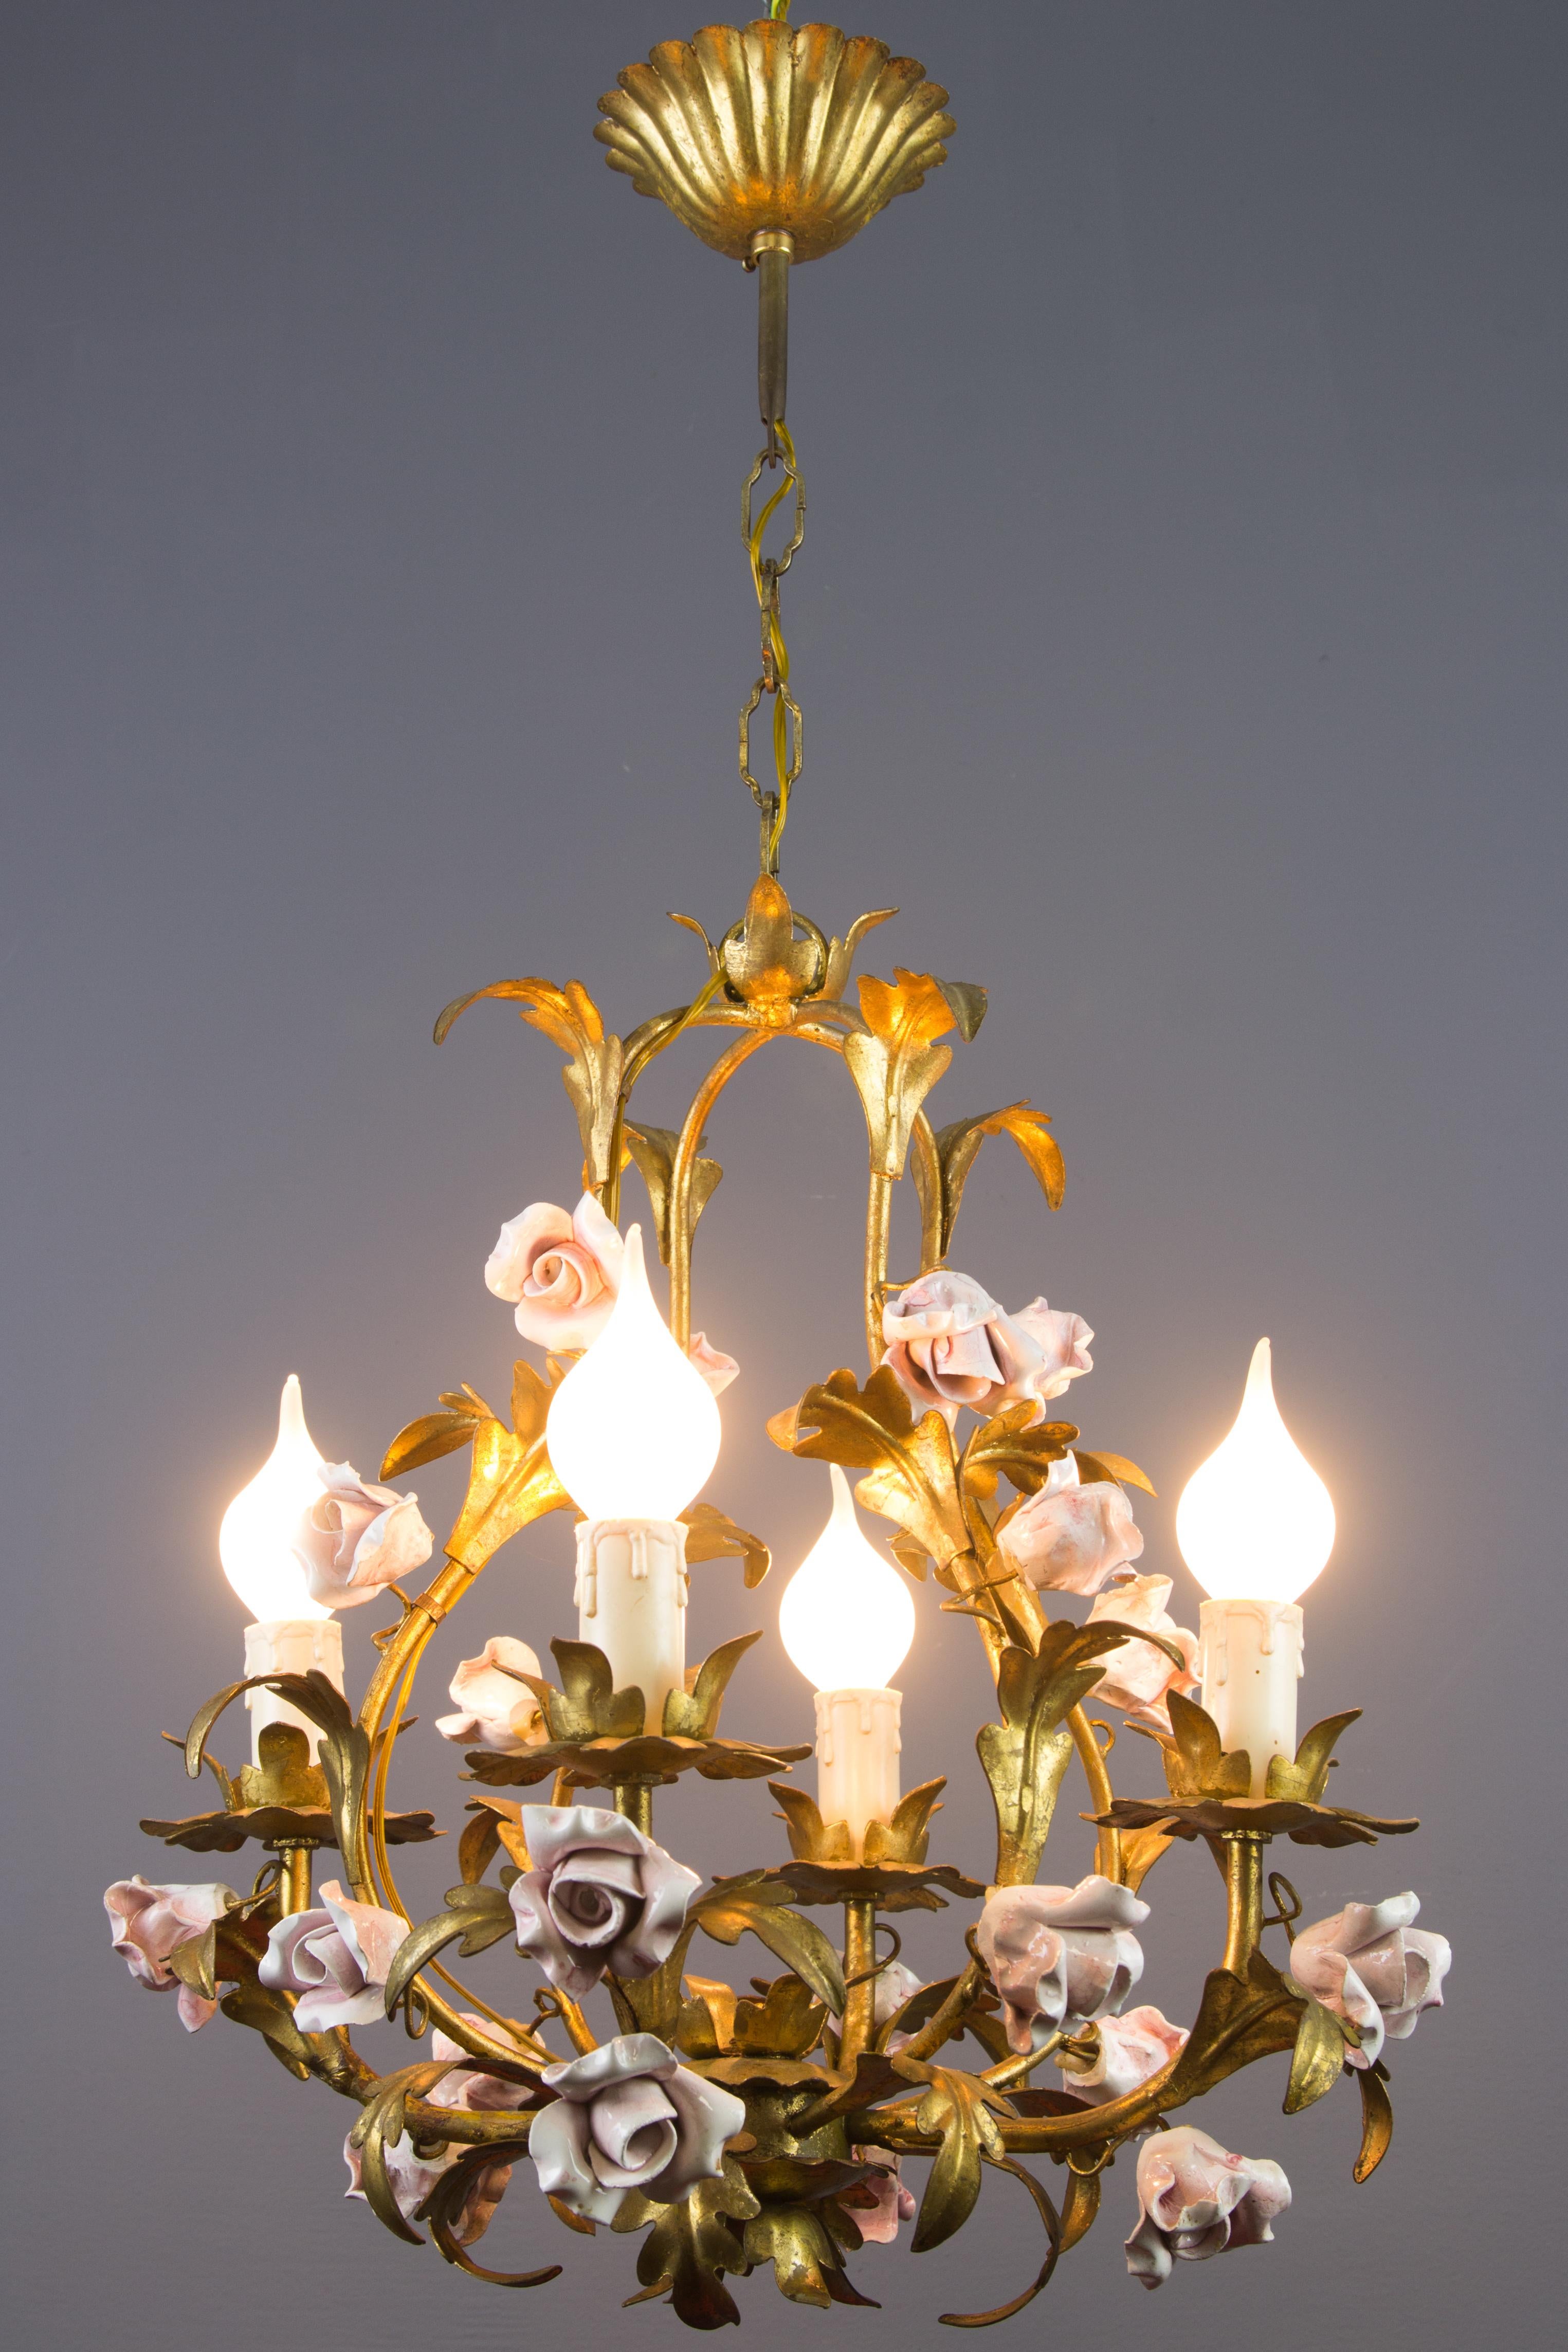 Adorable Italian Florentine birdcage four-light tôle chandelier, decorated with delicate pink ceramic roses and golden leaves, Italy, 1950s.
Four sockets for E14 size light bulbs.
Dimensions: height 68 cm / 26.77 in, diameter 35 cm / 13.78 in.